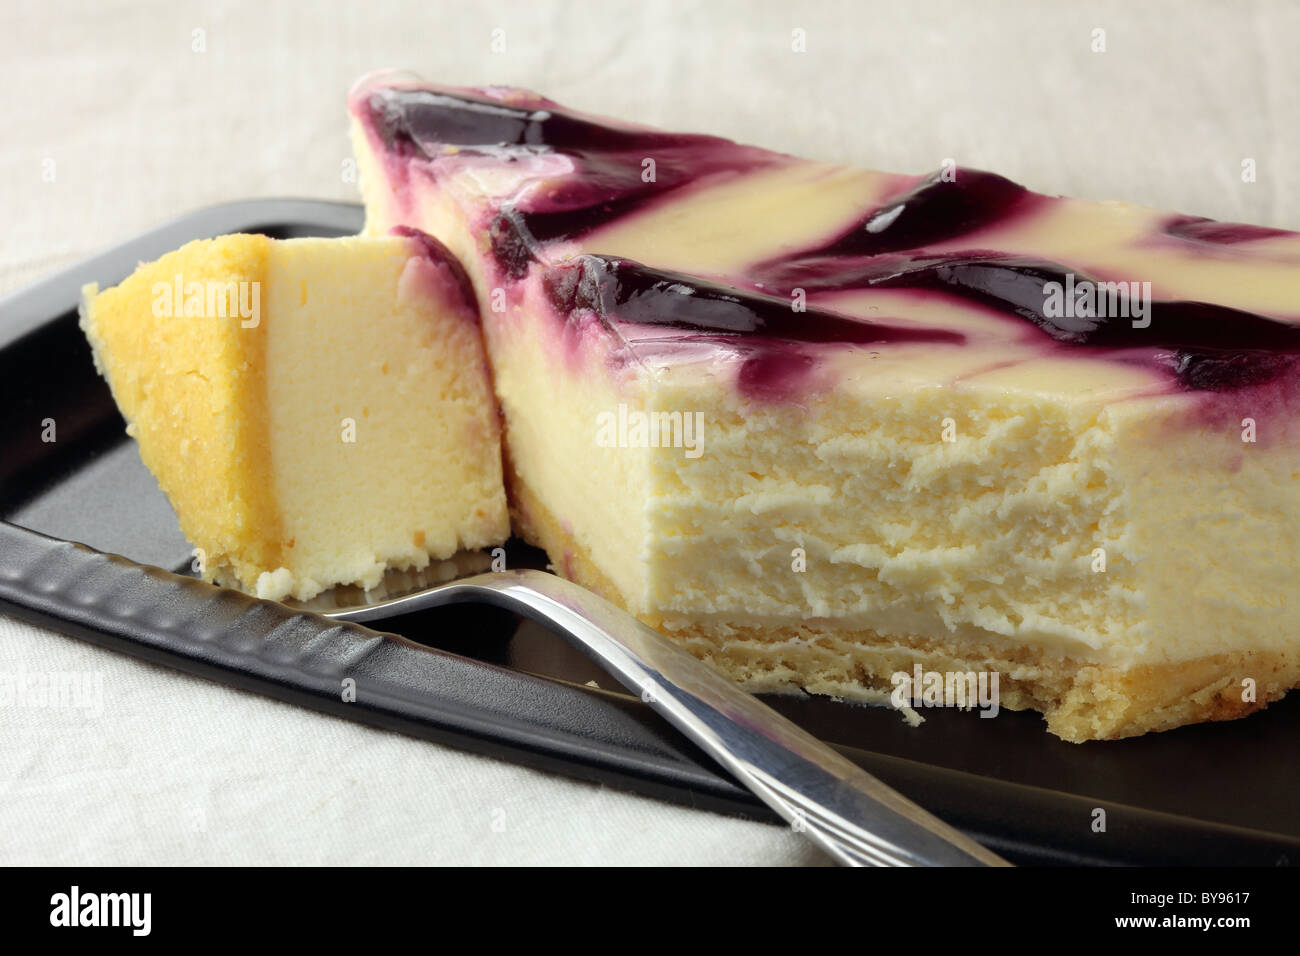 Cherry Cheesecake Banque D'Images